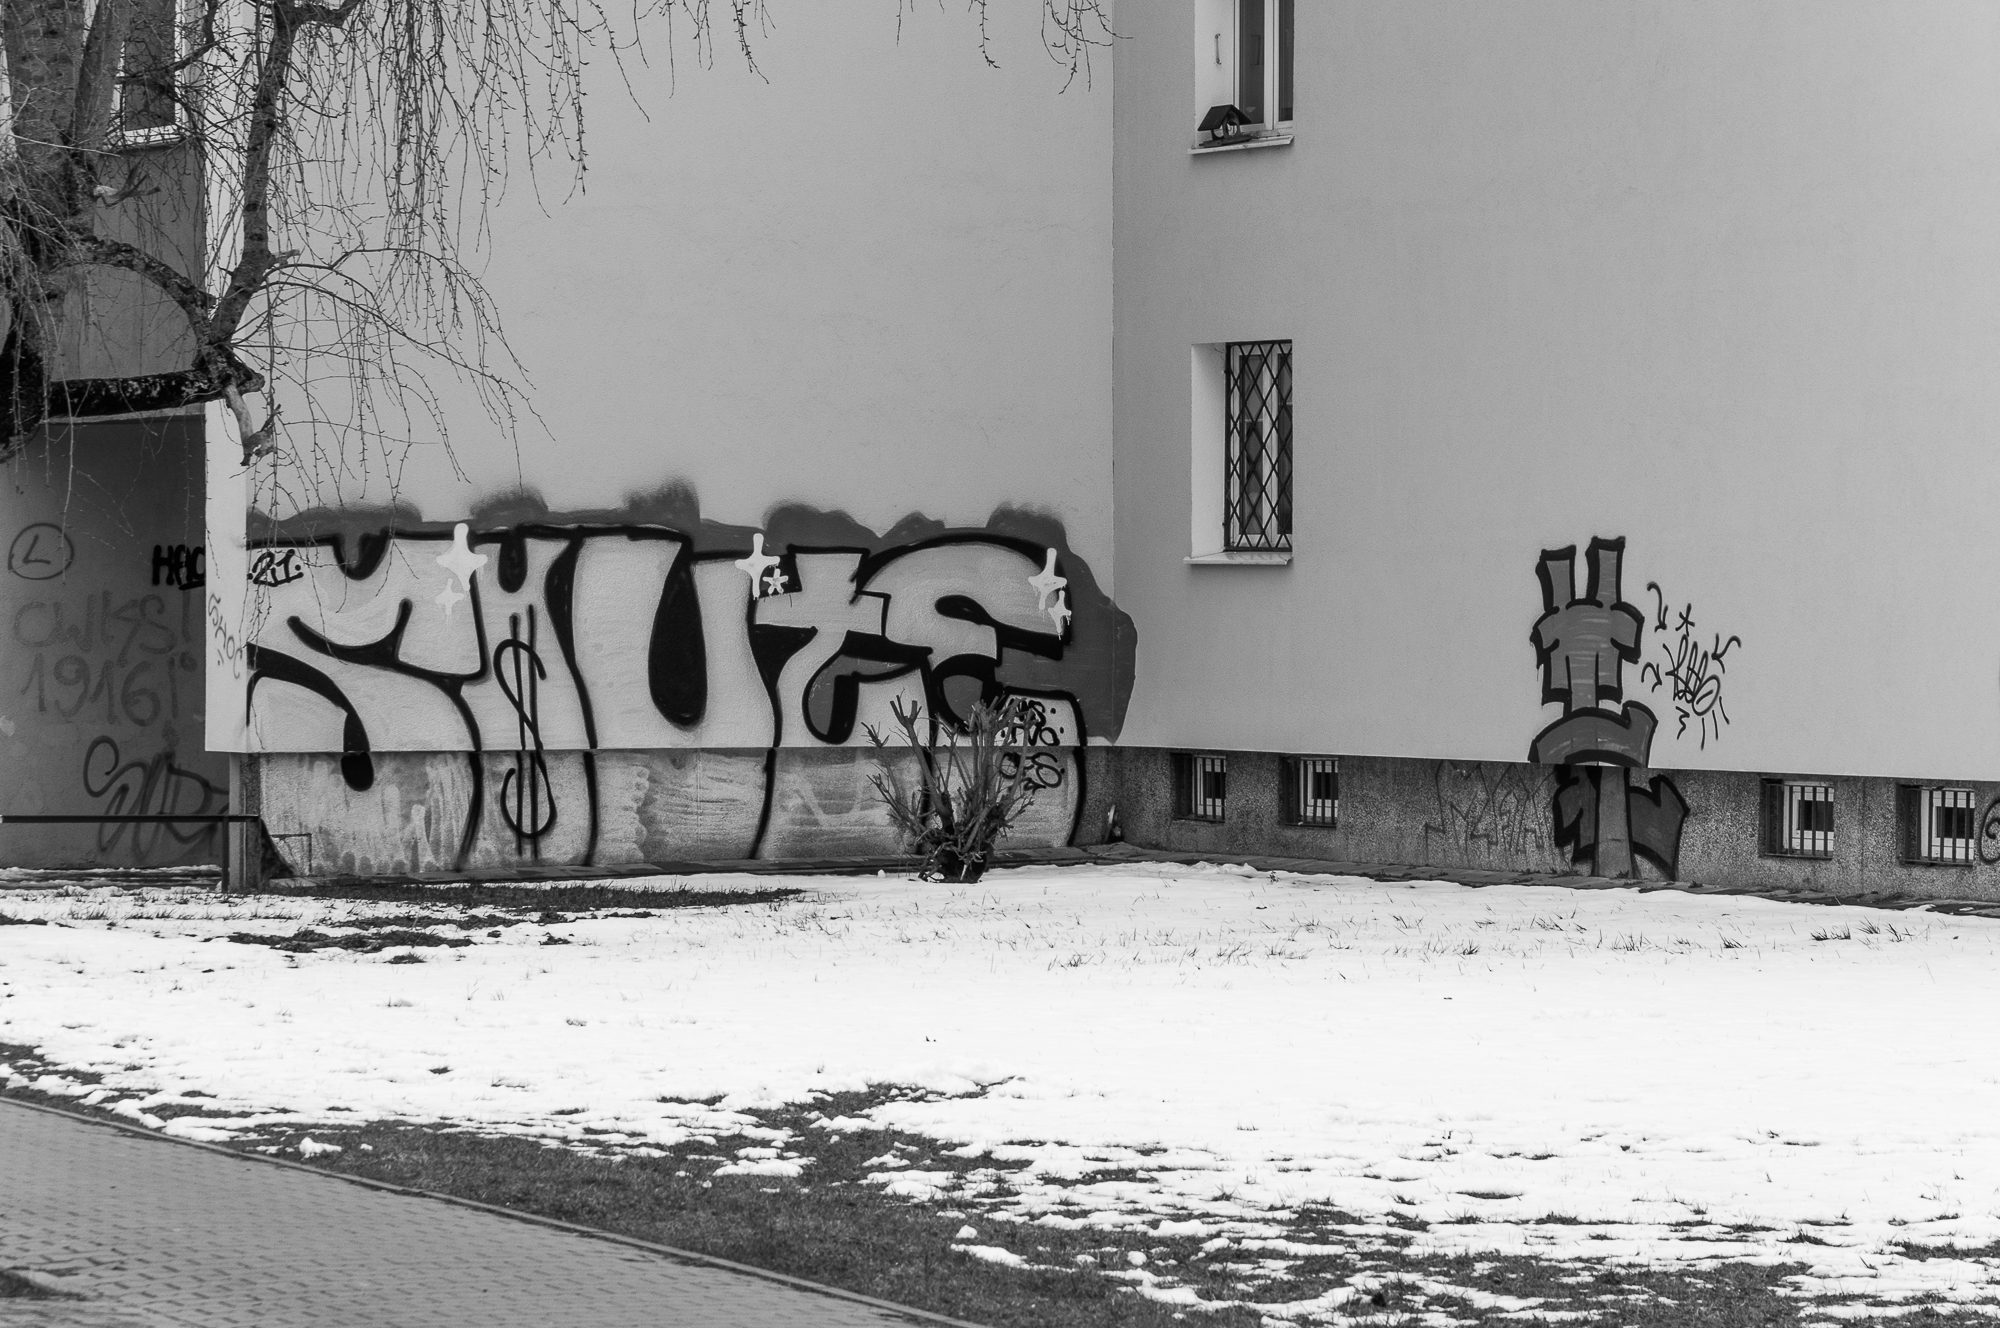 Adam Mazek Photography 2022. Warsaw Street Photography. Post: "Fight for yourself, but do not fight with others." Minimalism. Graffiti.